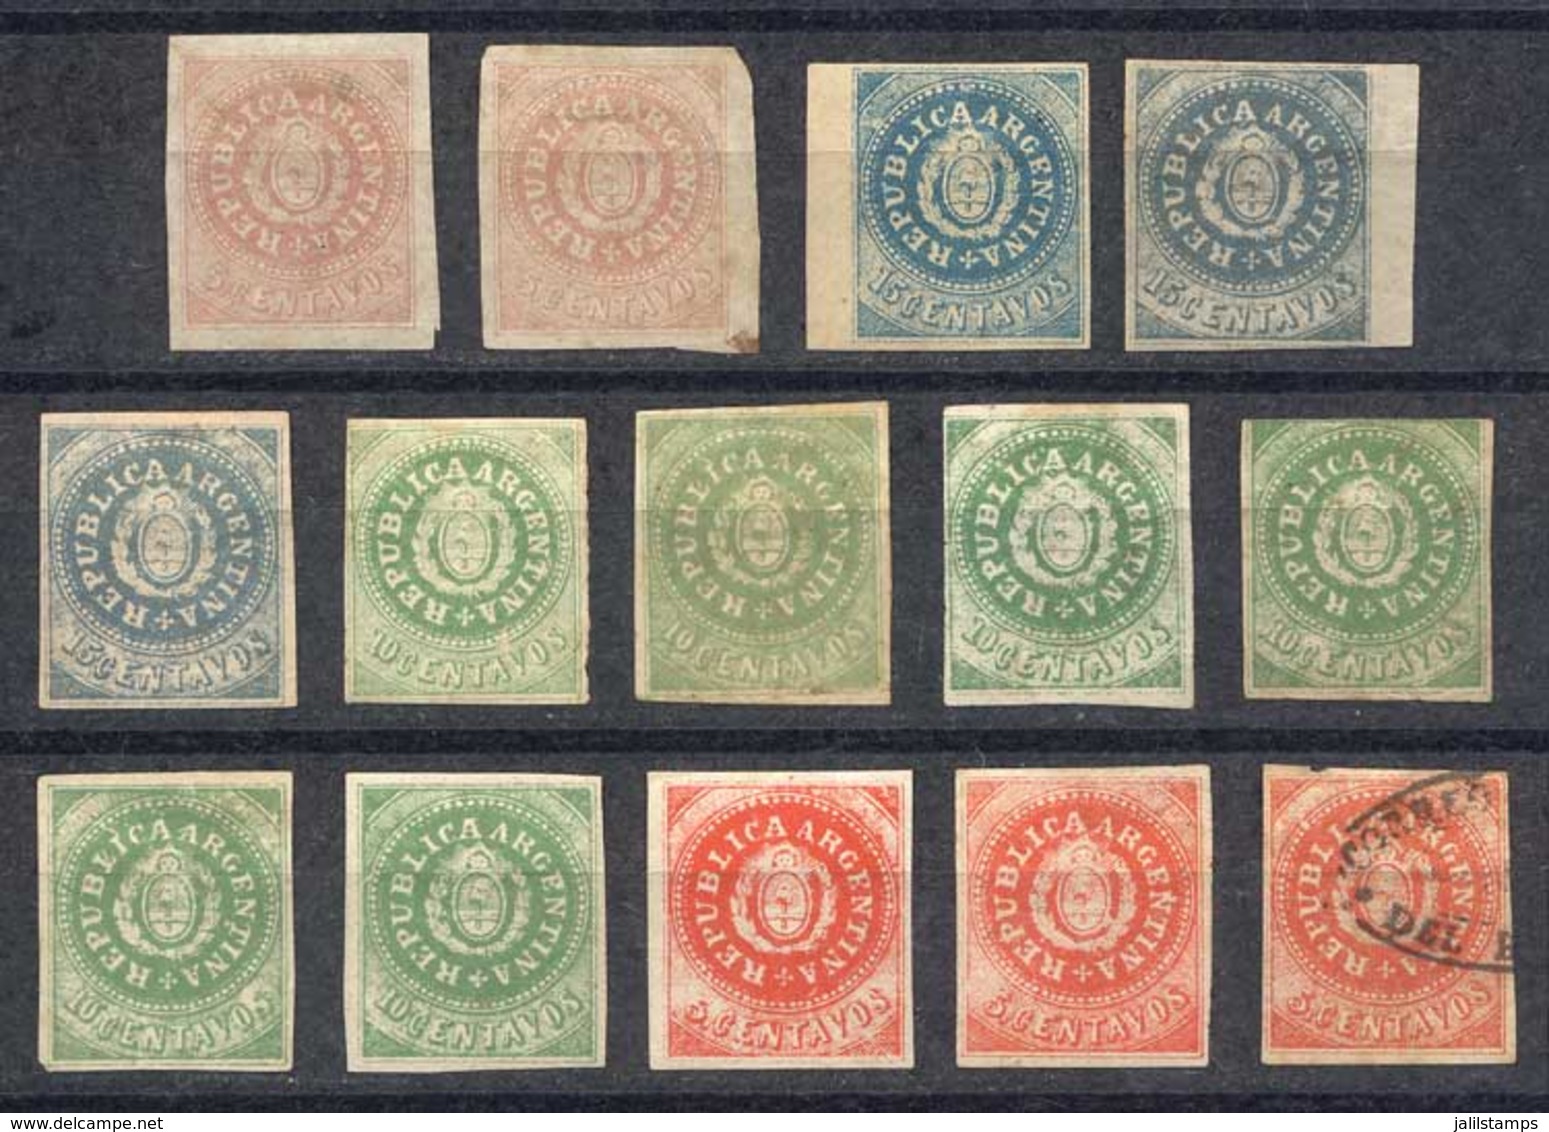 ARGENTINA: Lot Of Stamp FORGERIES, Some Are Very Well Made, Interesting Group To Study And Compare! - Unused Stamps